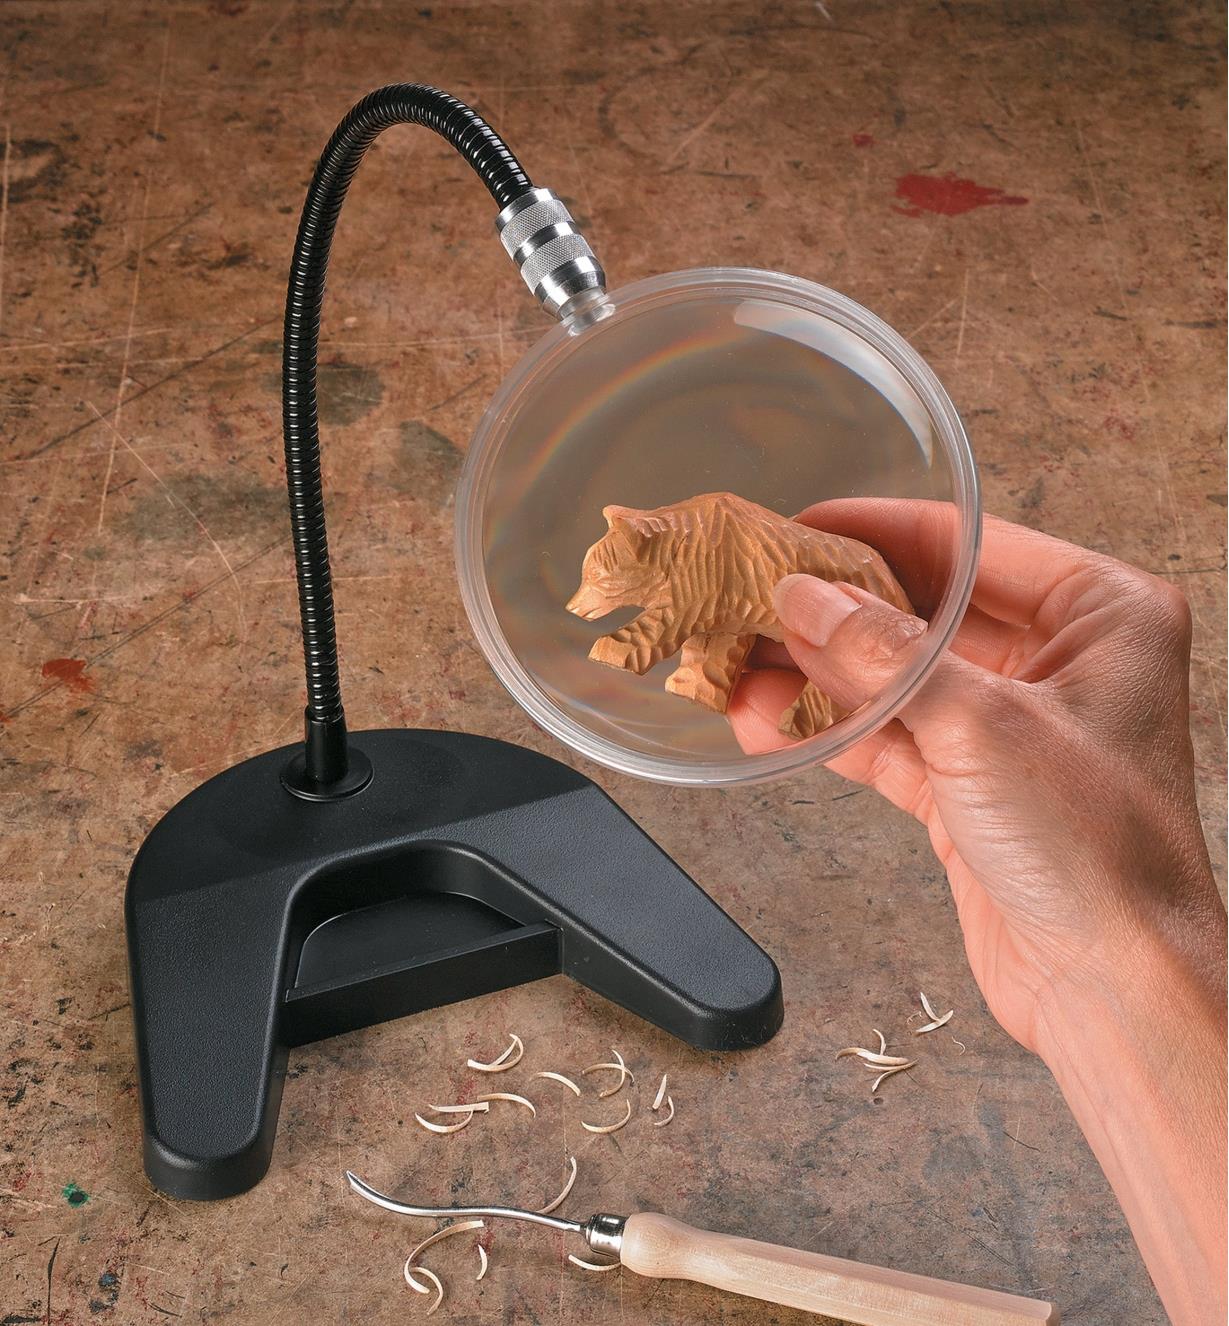 Flex-Neck Desk Magnifier used to magnify a small bear carving